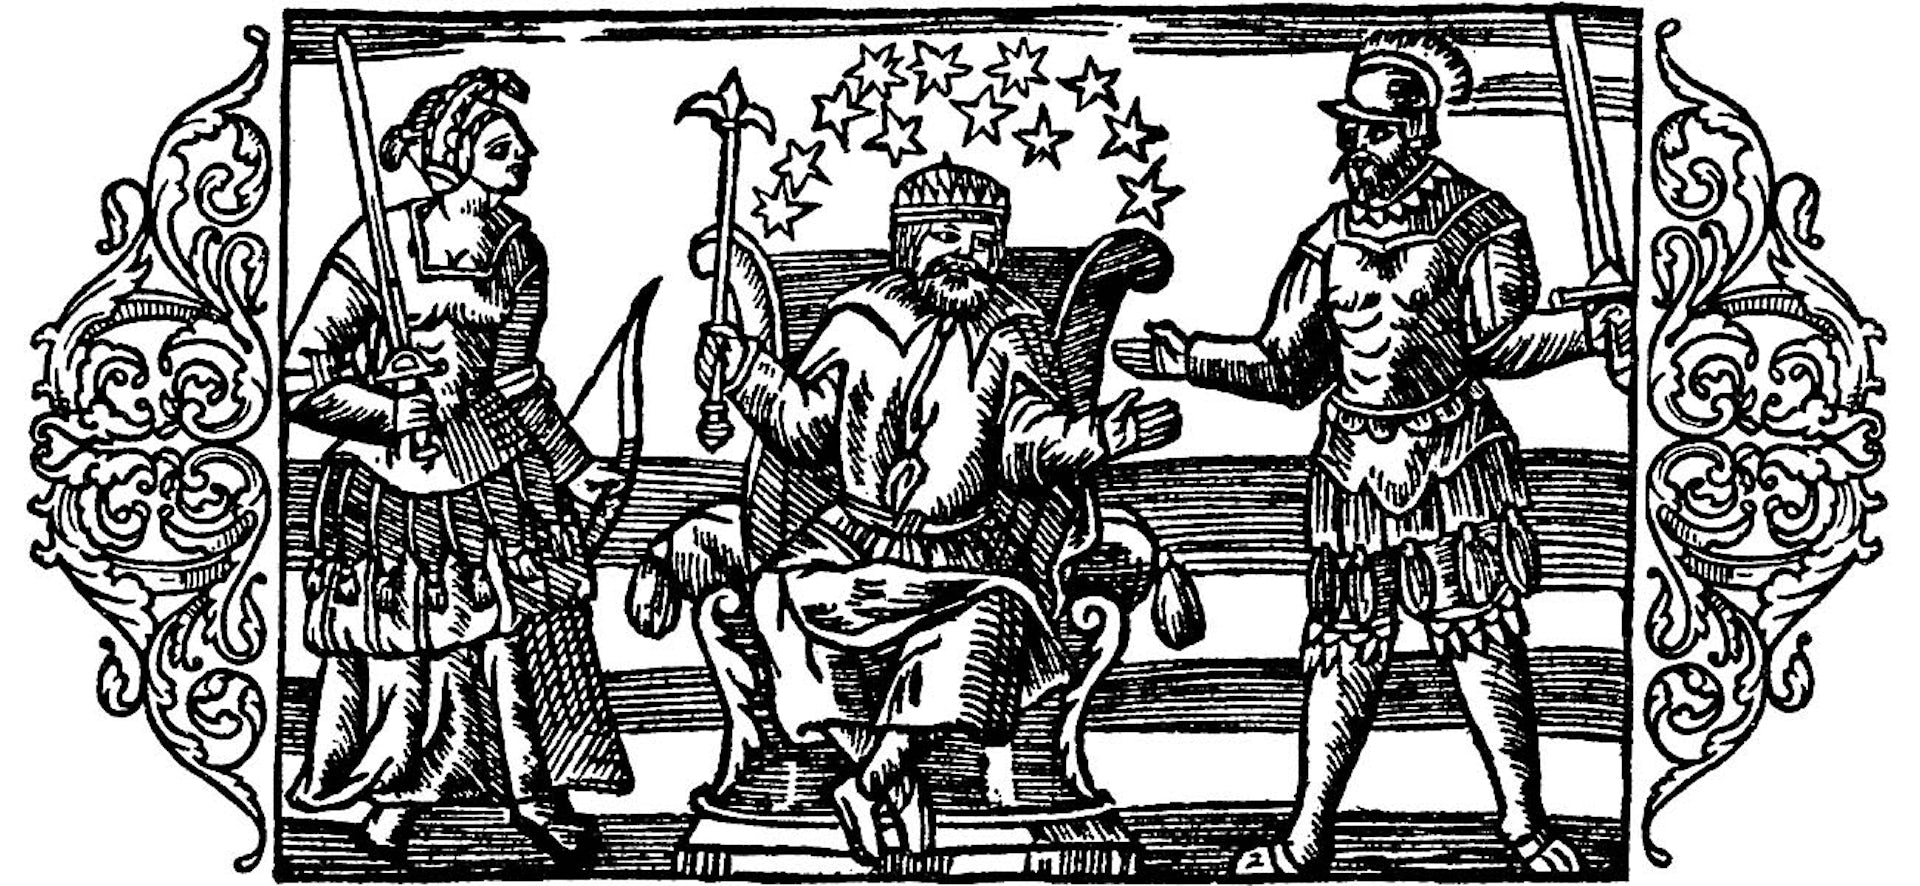  illustration from A Description of the Northern Peoples by Olaus Magnus (1555)